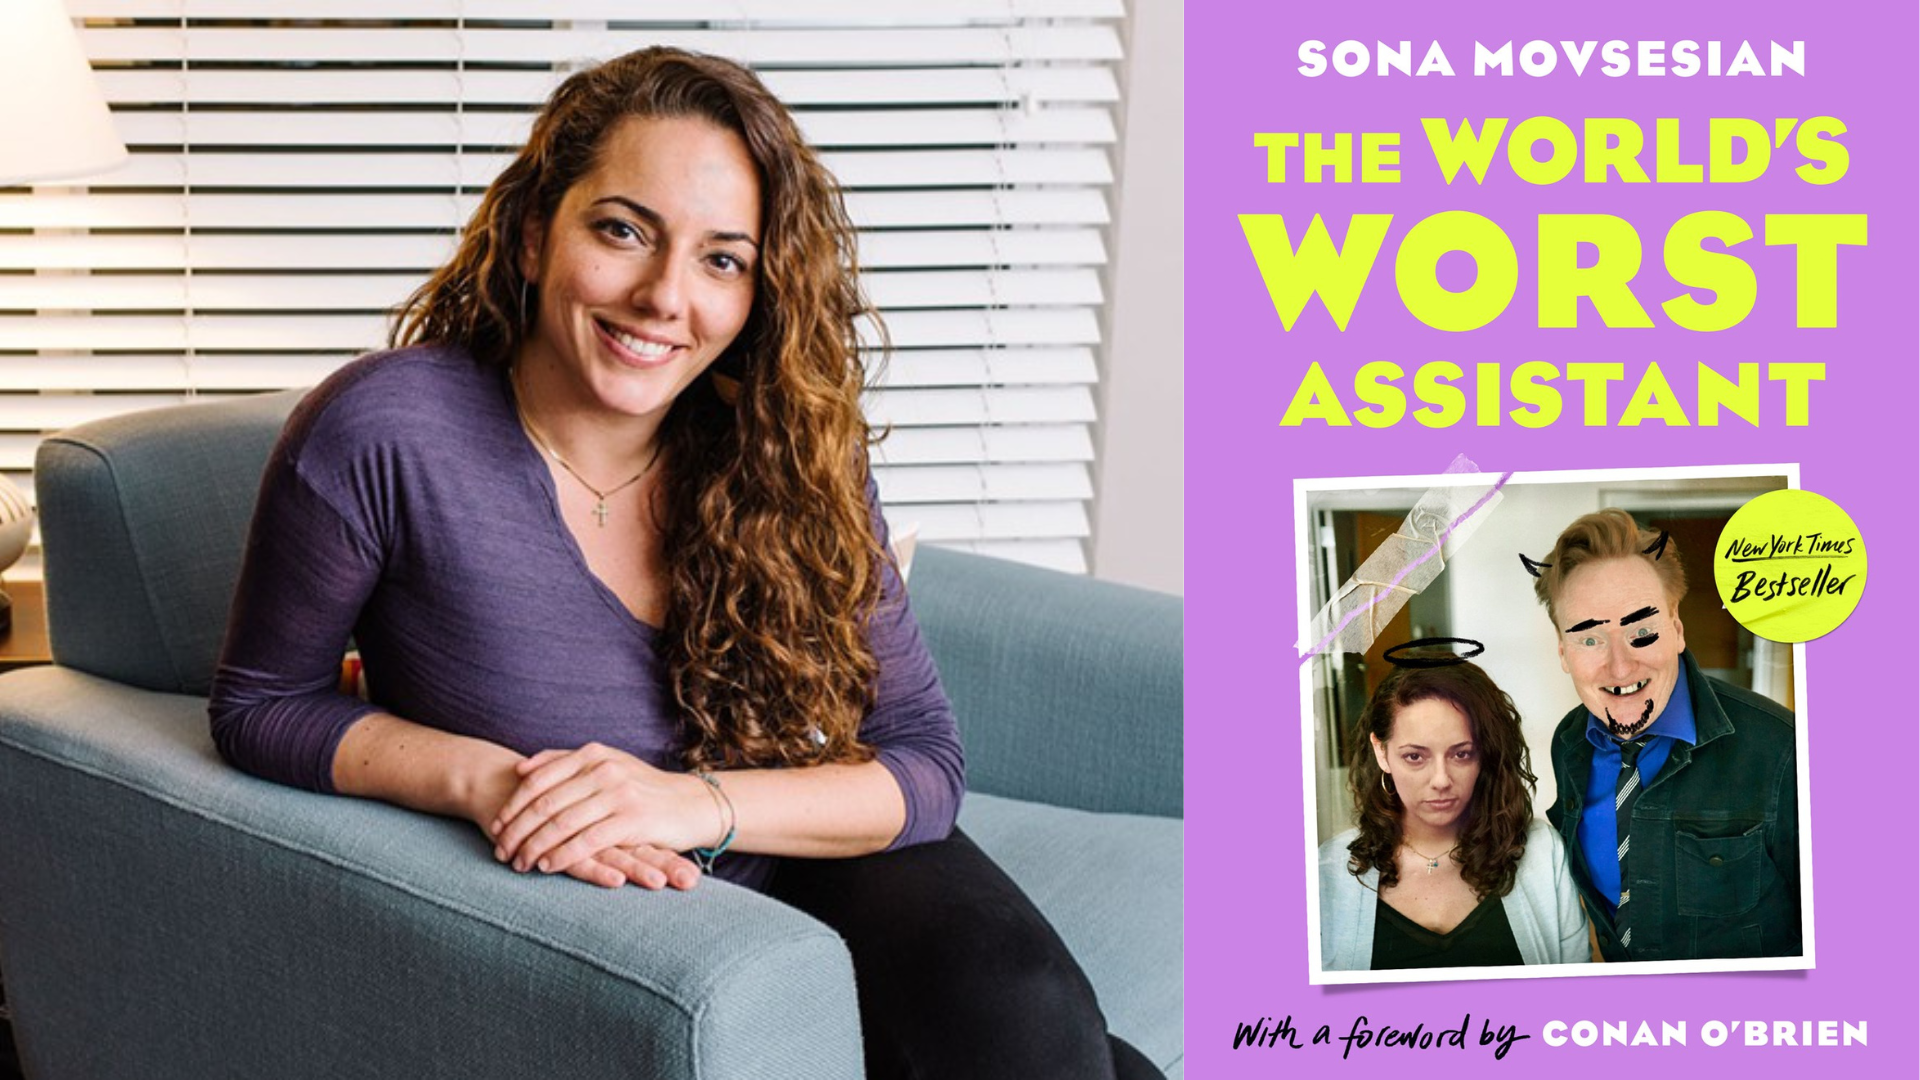 photo of Sona Movsesian next to a cover of her book, purple with green text reading "the world's worst assistant"